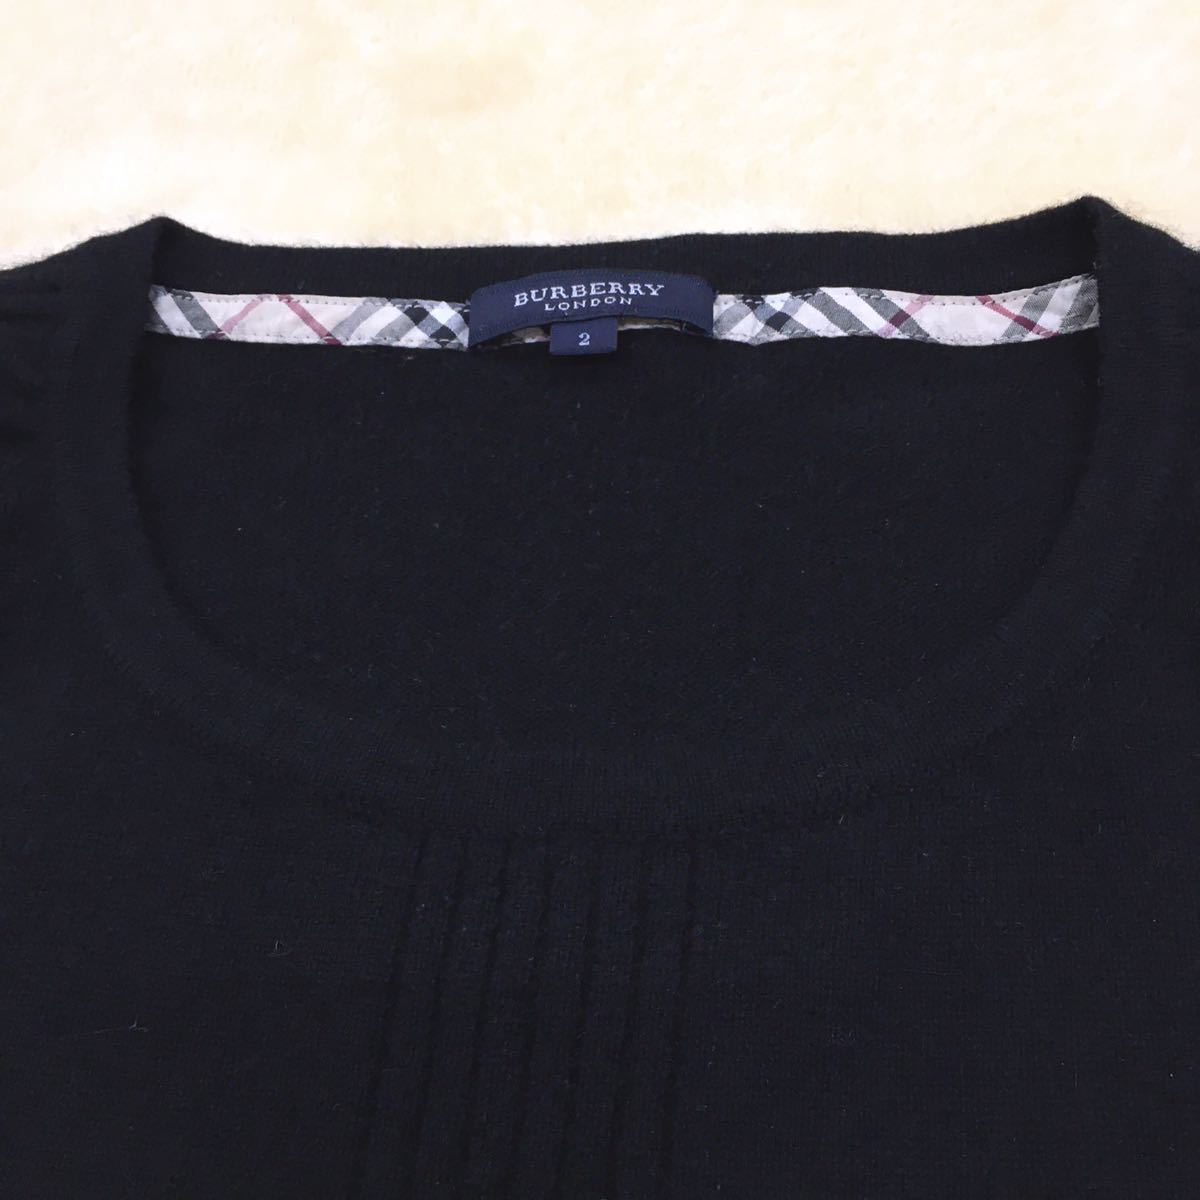 BURBERRY LONDON Burberry London cashmere 100% knitted sweater short sleeves hose Logo embroidery lady's size 2 three . association 